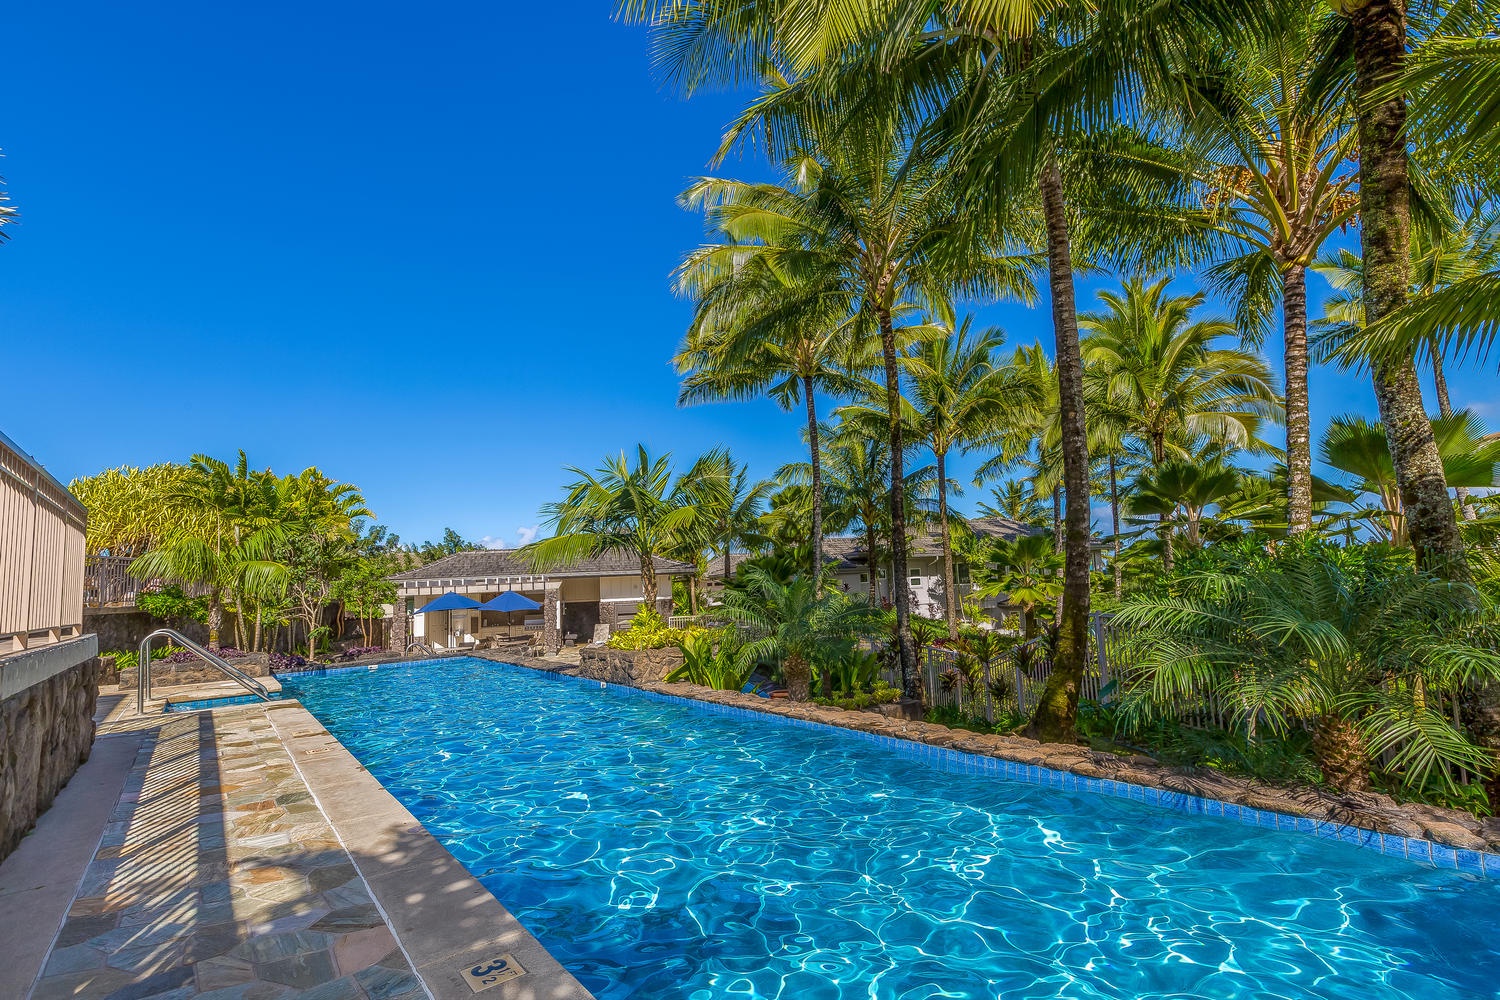 Princeville Vacation Rentals, Hale Moana - River style pool